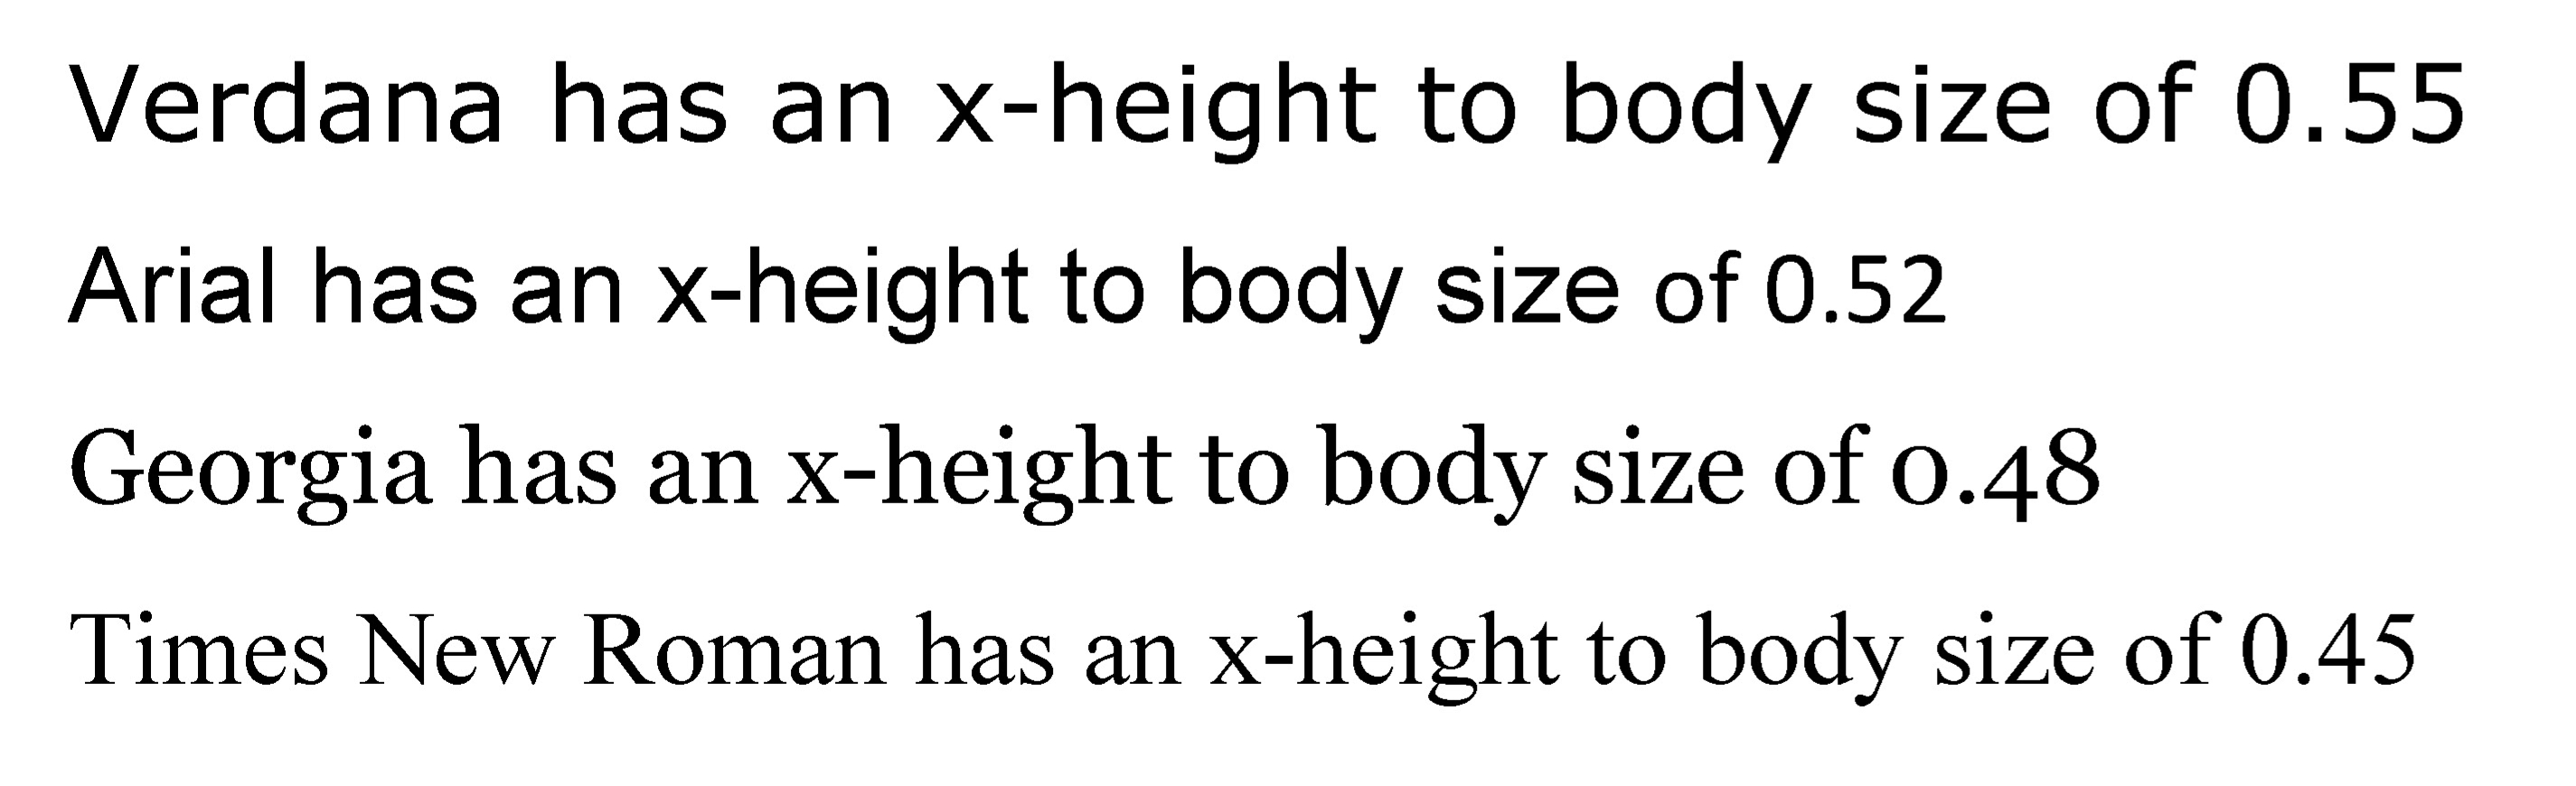 Relationship between x-height and body size